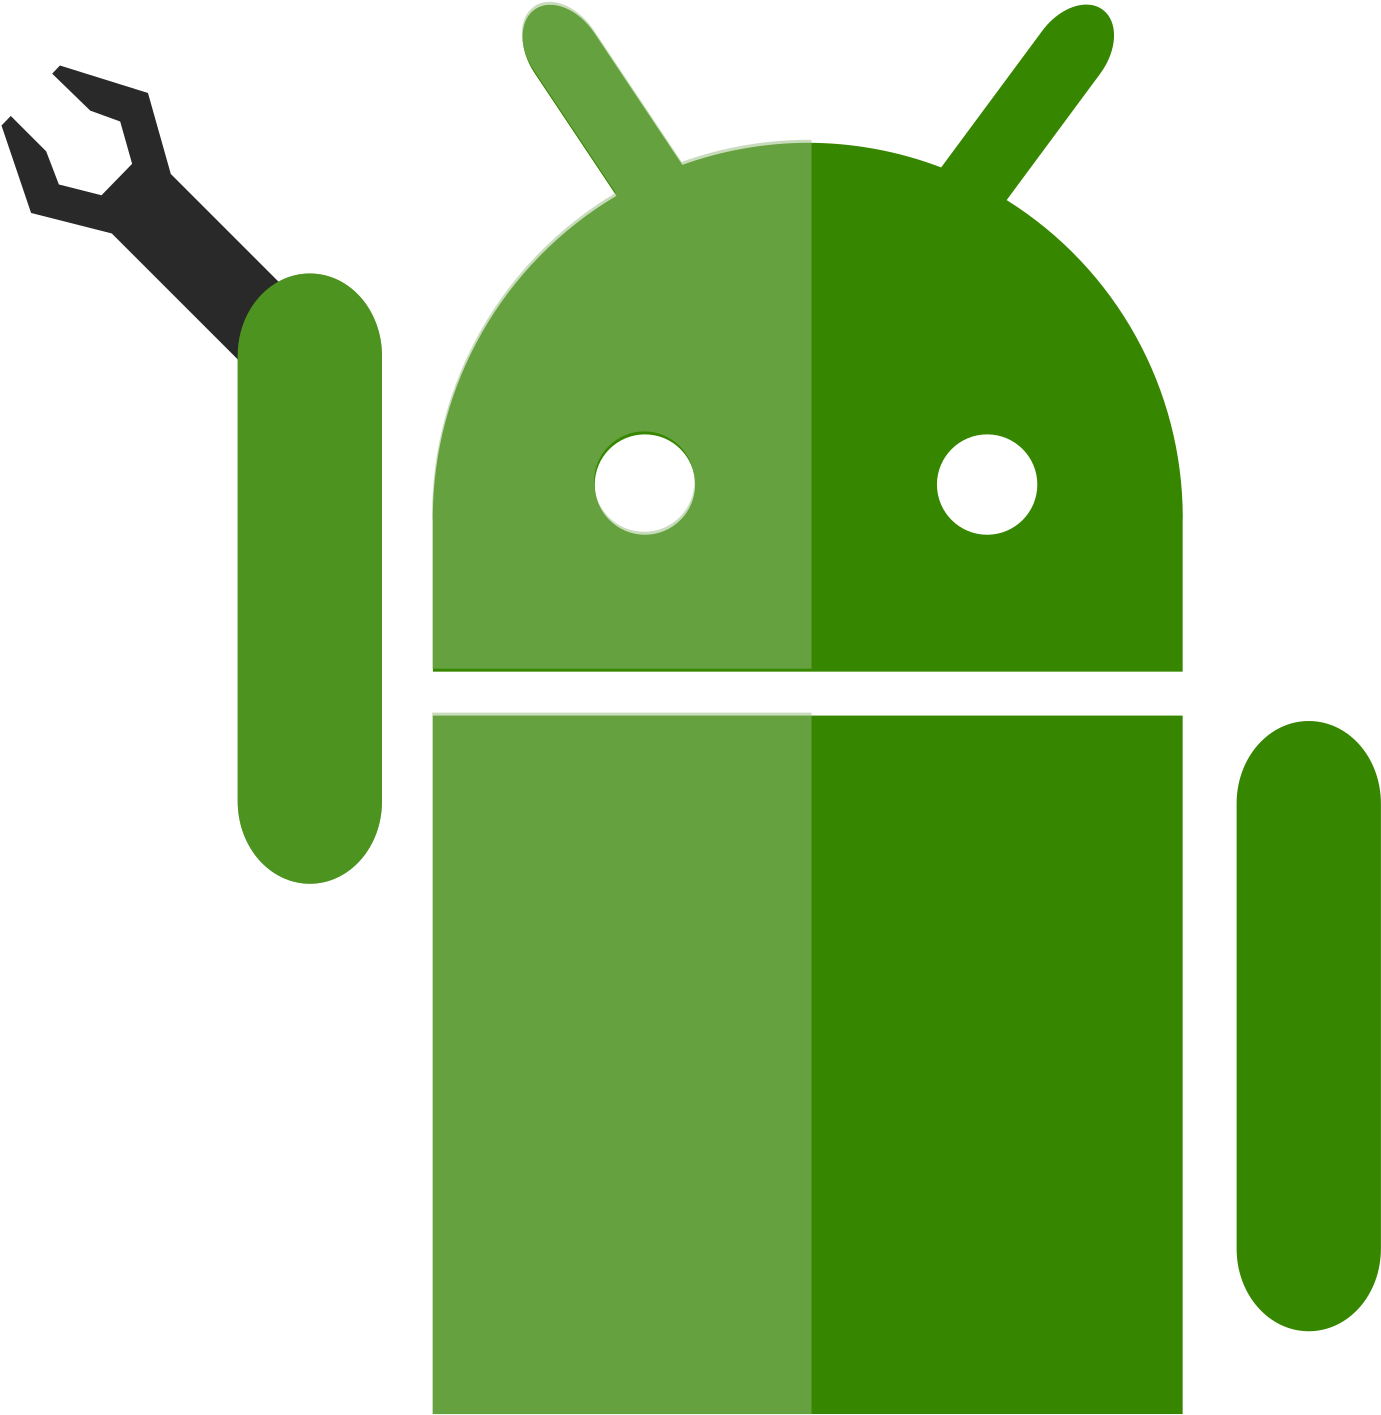 Download Android Robot Vector at Vectorified.com | Collection of ...